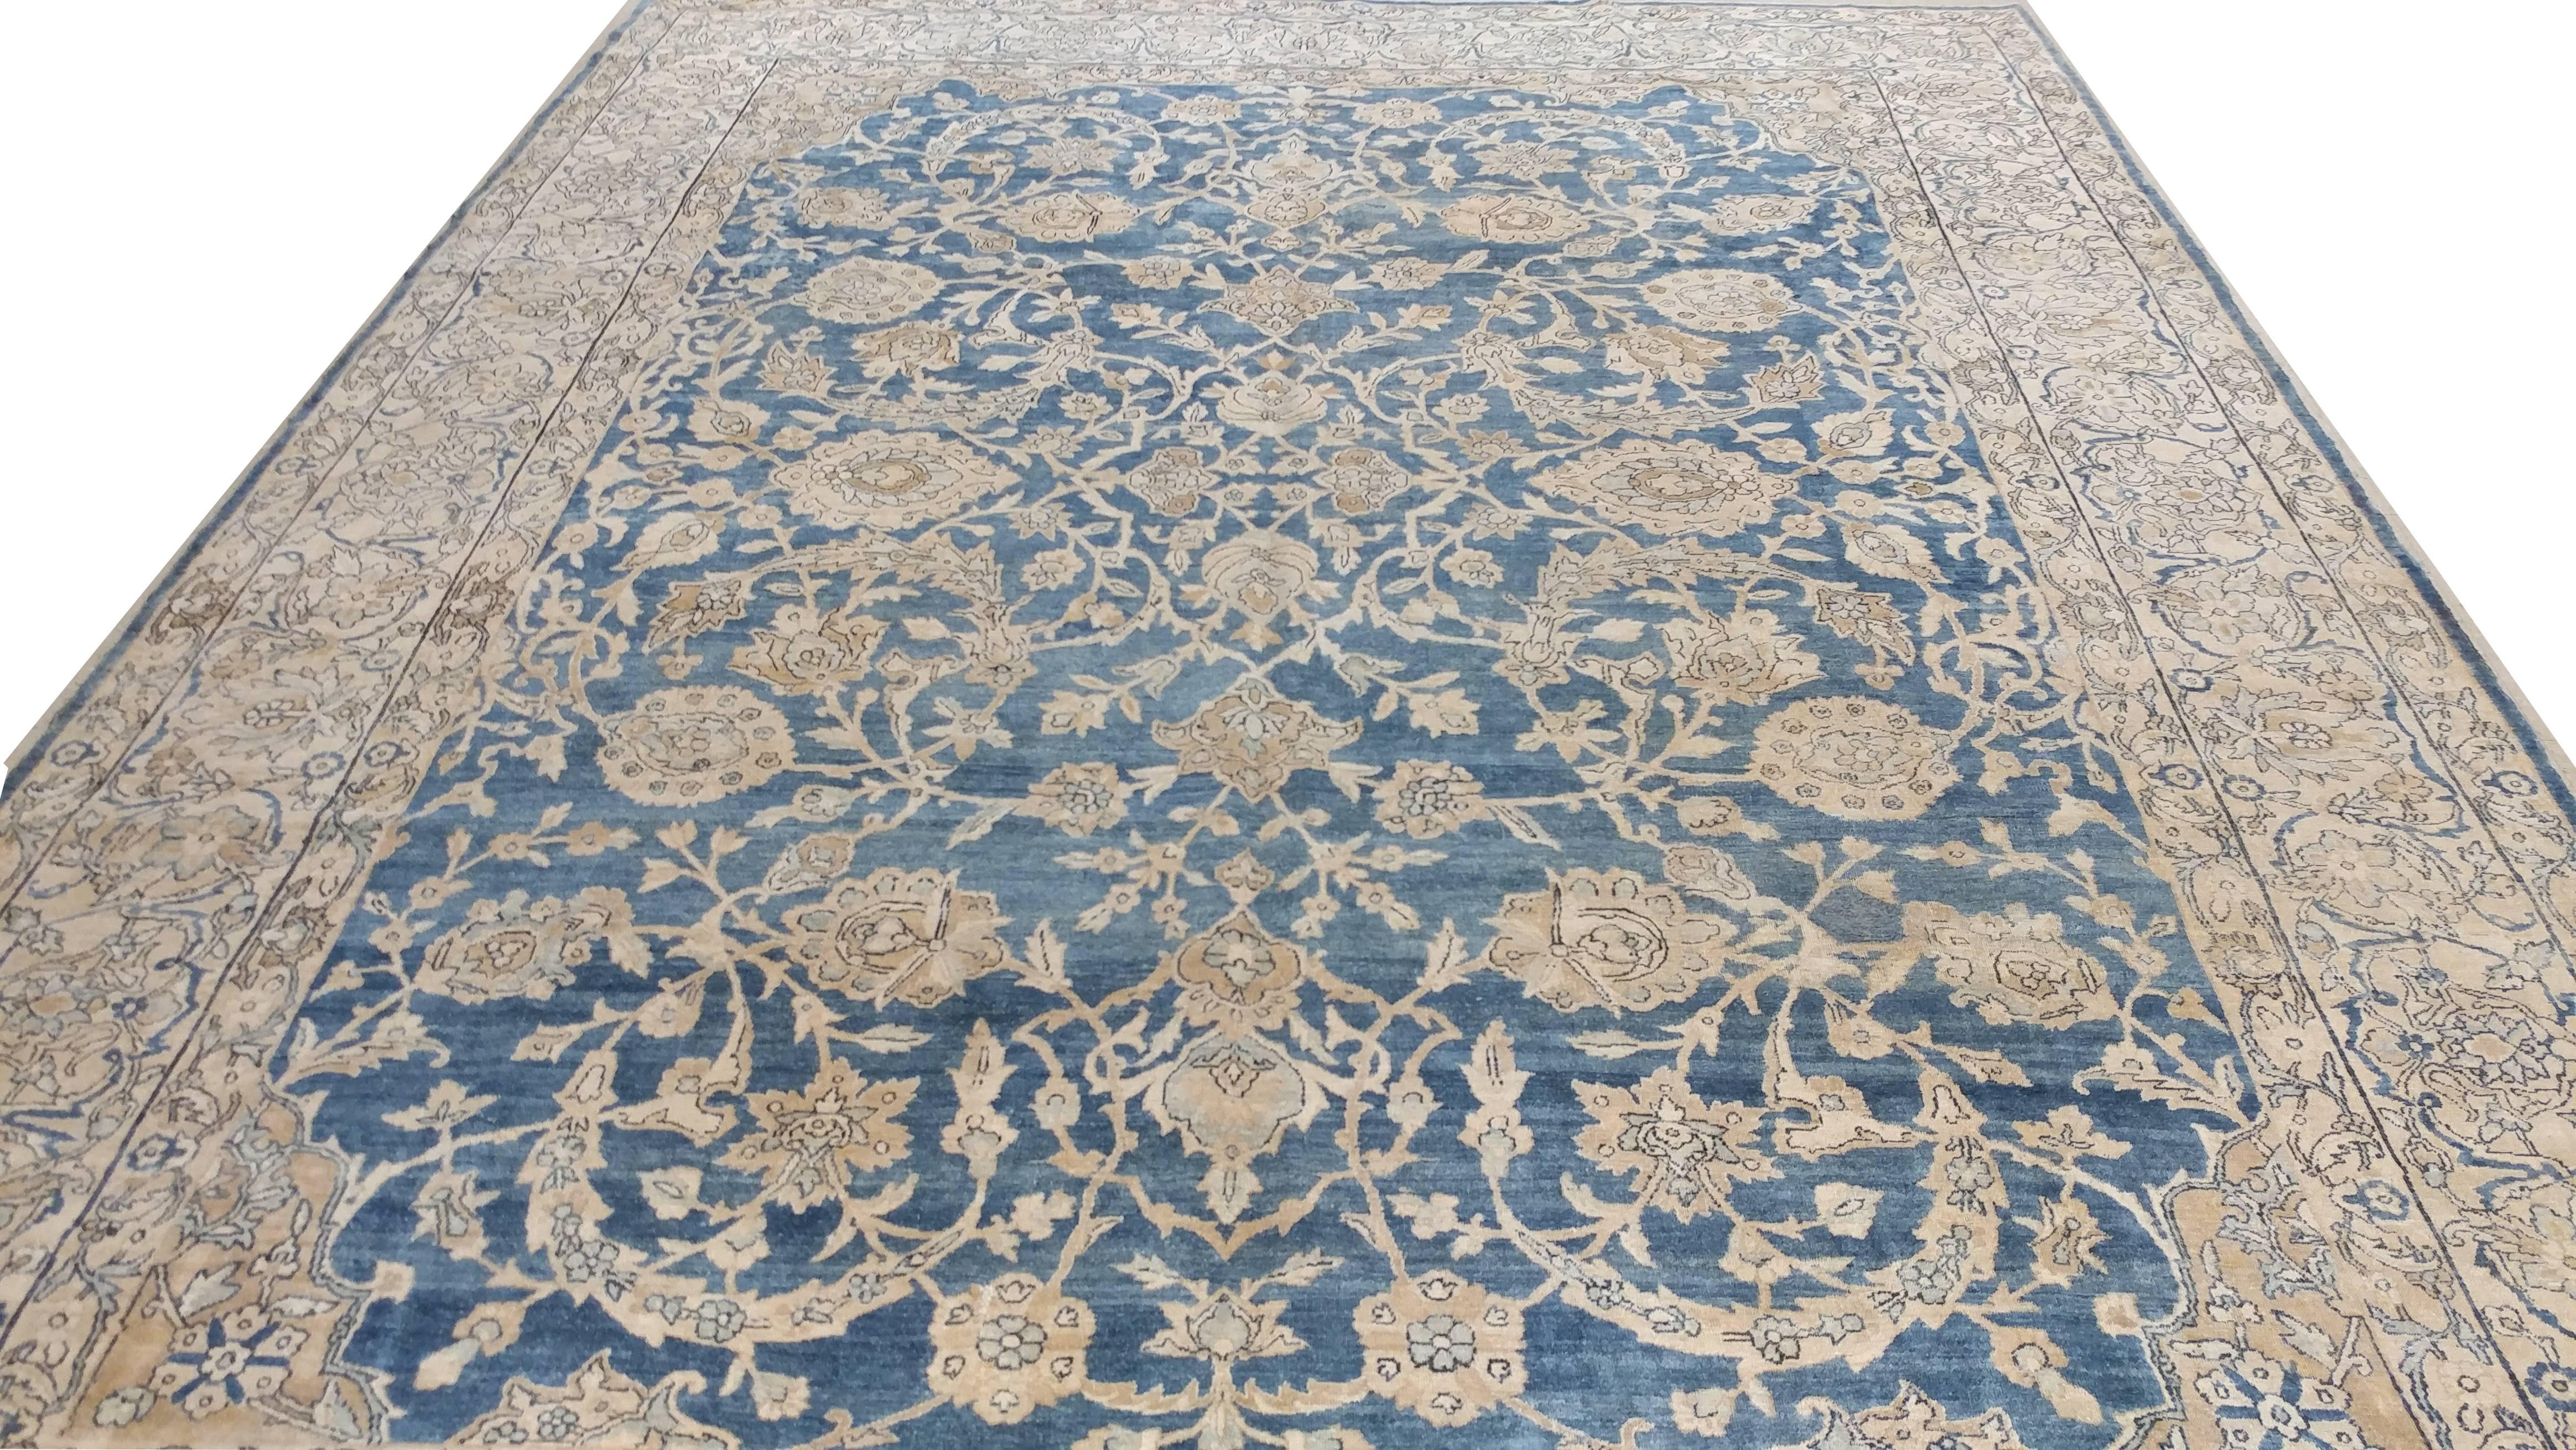 Antique Persian Kerman Carpet, Oriental Rug, Handmade, Blue, Ivory, Taupe, Tan In Good Condition For Sale In Port Washington, NY